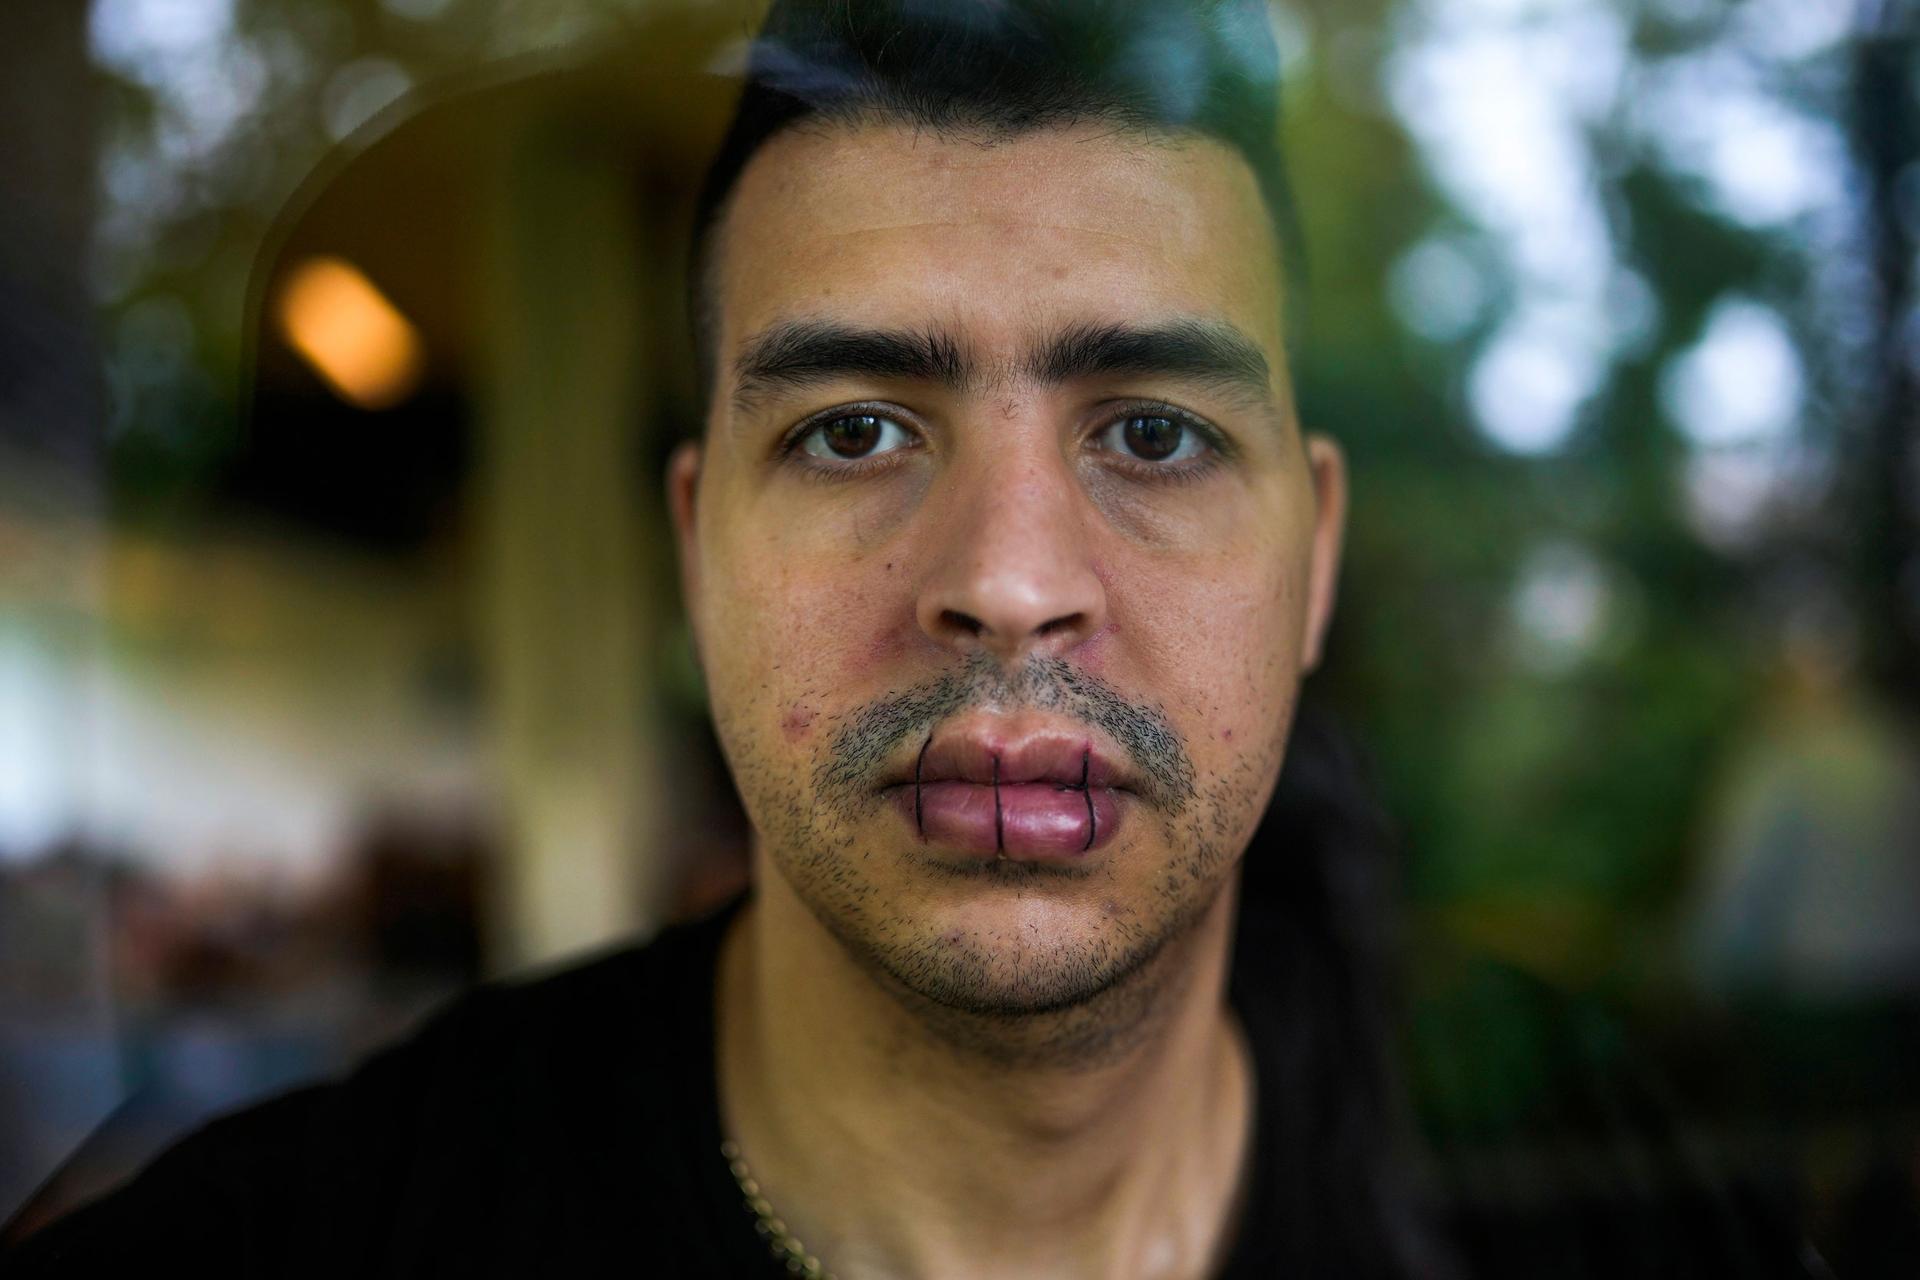 A close up portrait of a man who has sewn his lips together with three stitches.